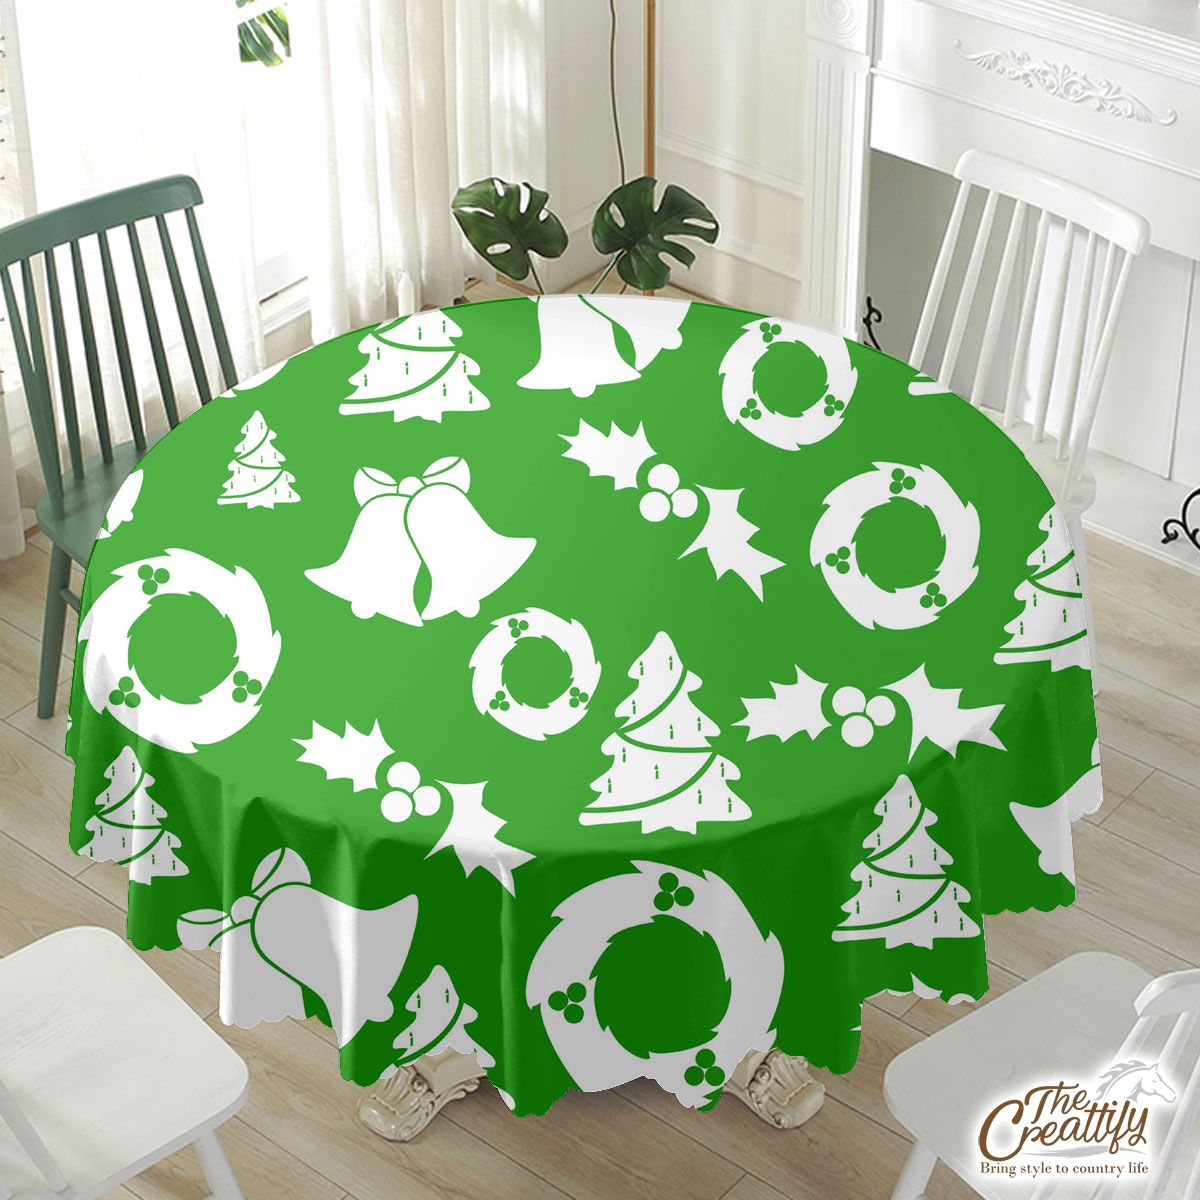 Christmas Wreath, Holly Leaf, Pine Tree And Bells On Green Waterproof Tablecloth